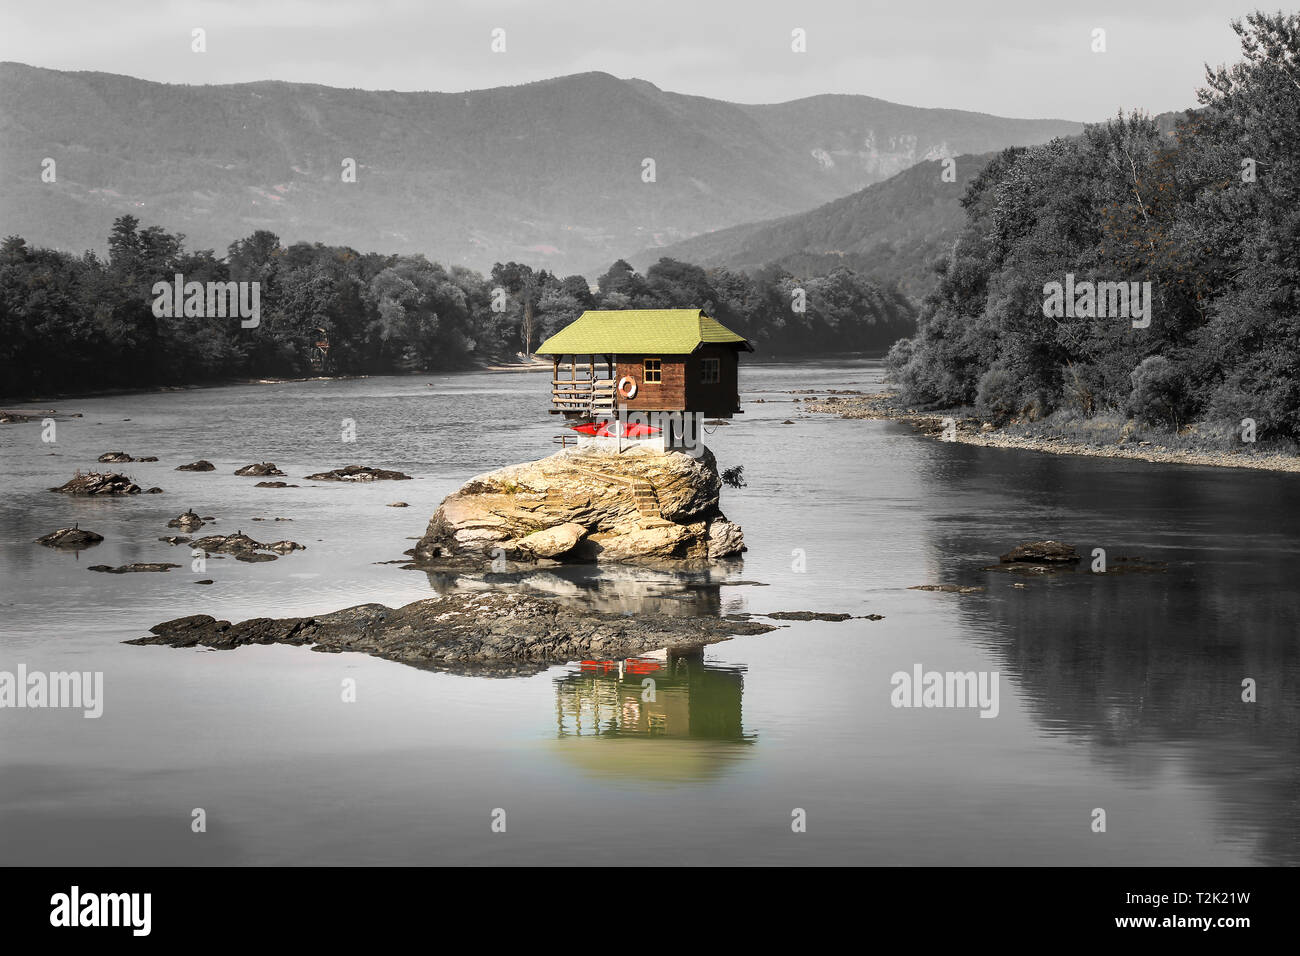 Selective color of a famous Drina house, a little colorful cabin on the middle of a river in Bajina Basta Stock Photo